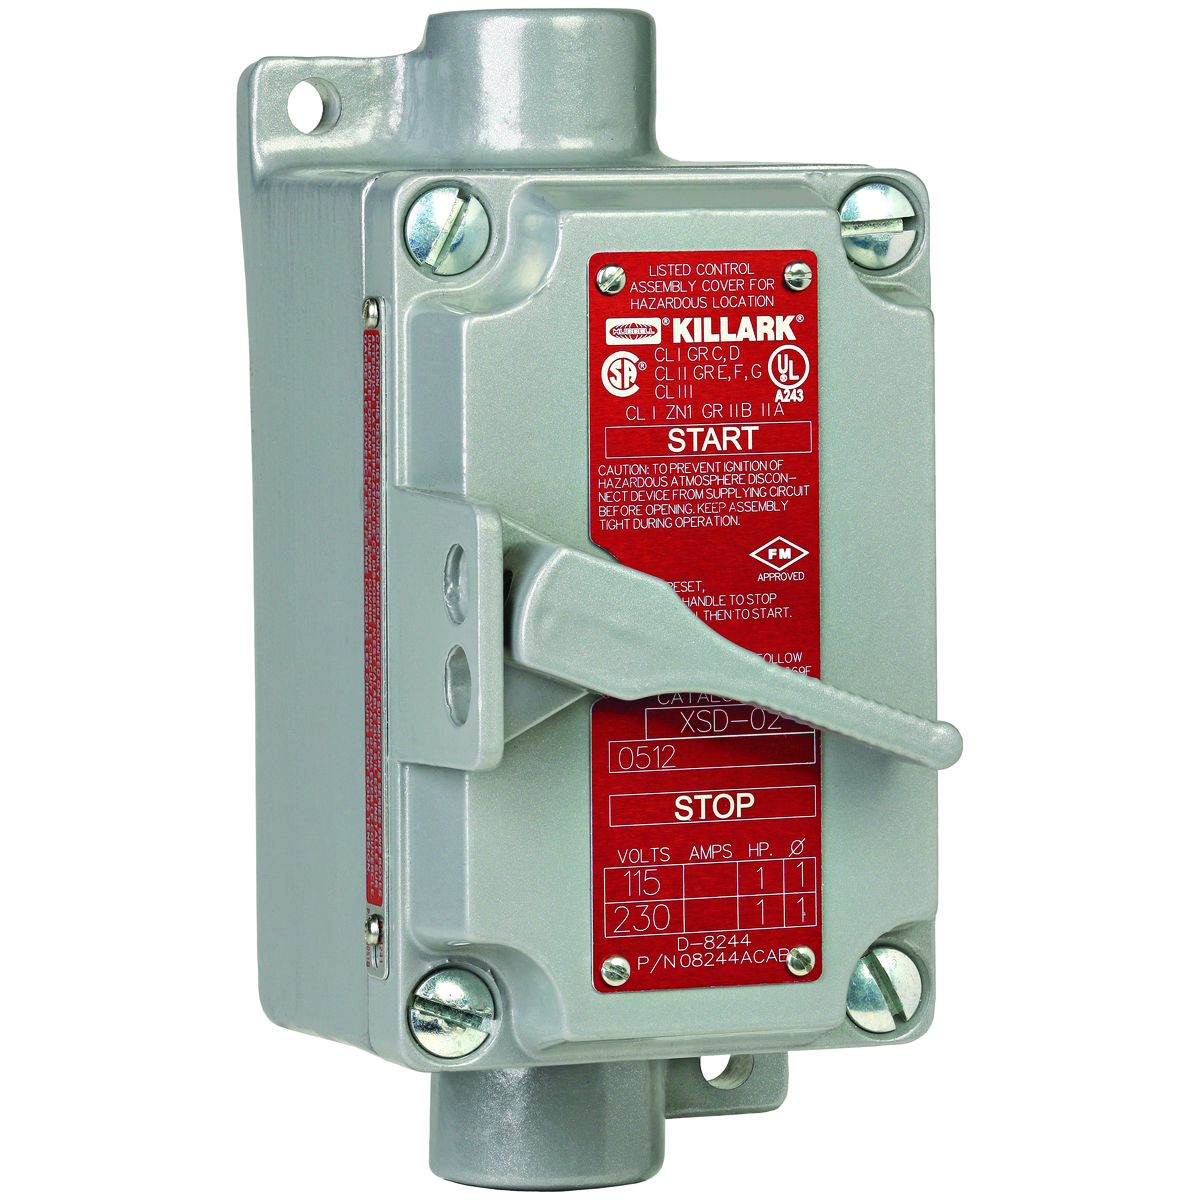 XSX SERIES - ALUMINUM DEAD-END SINGLE GANG 3-POLE, 3-PHASE MANUAL MOTORSTARTING SWITCH UNIT - WITHOUT OVERLOAD PROTECTION - HUB SIZE 1/2 INCH